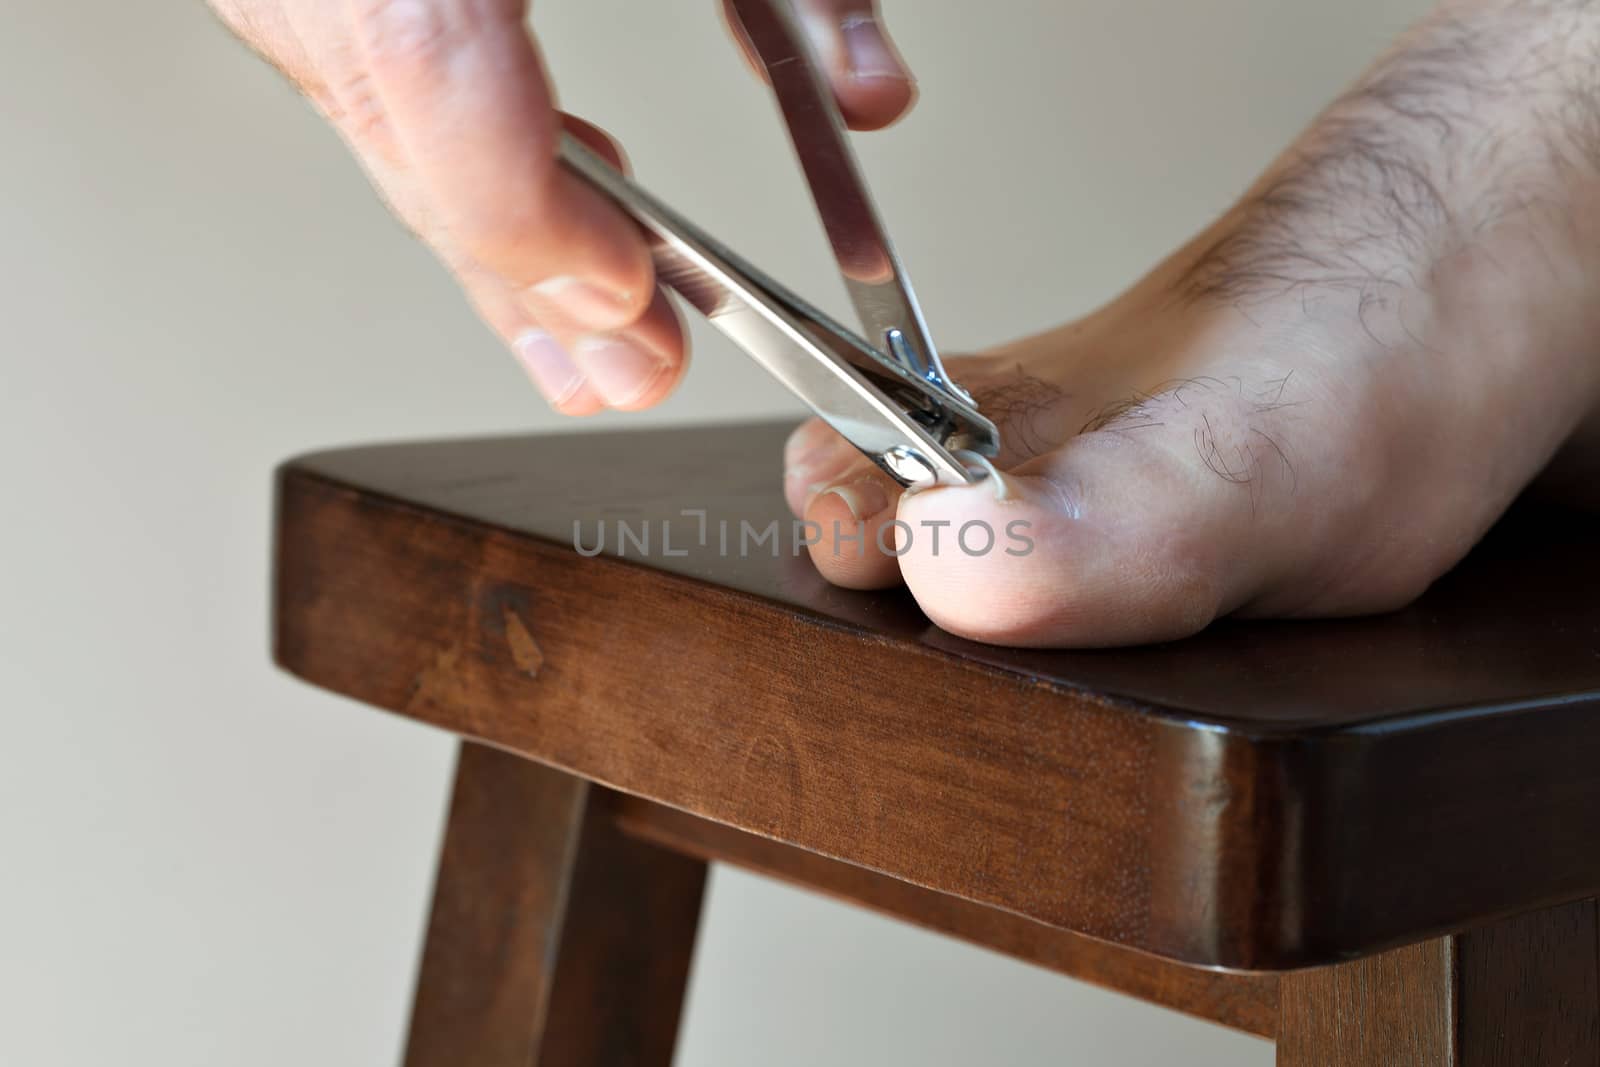 Clipping Toenails by graficallyminded